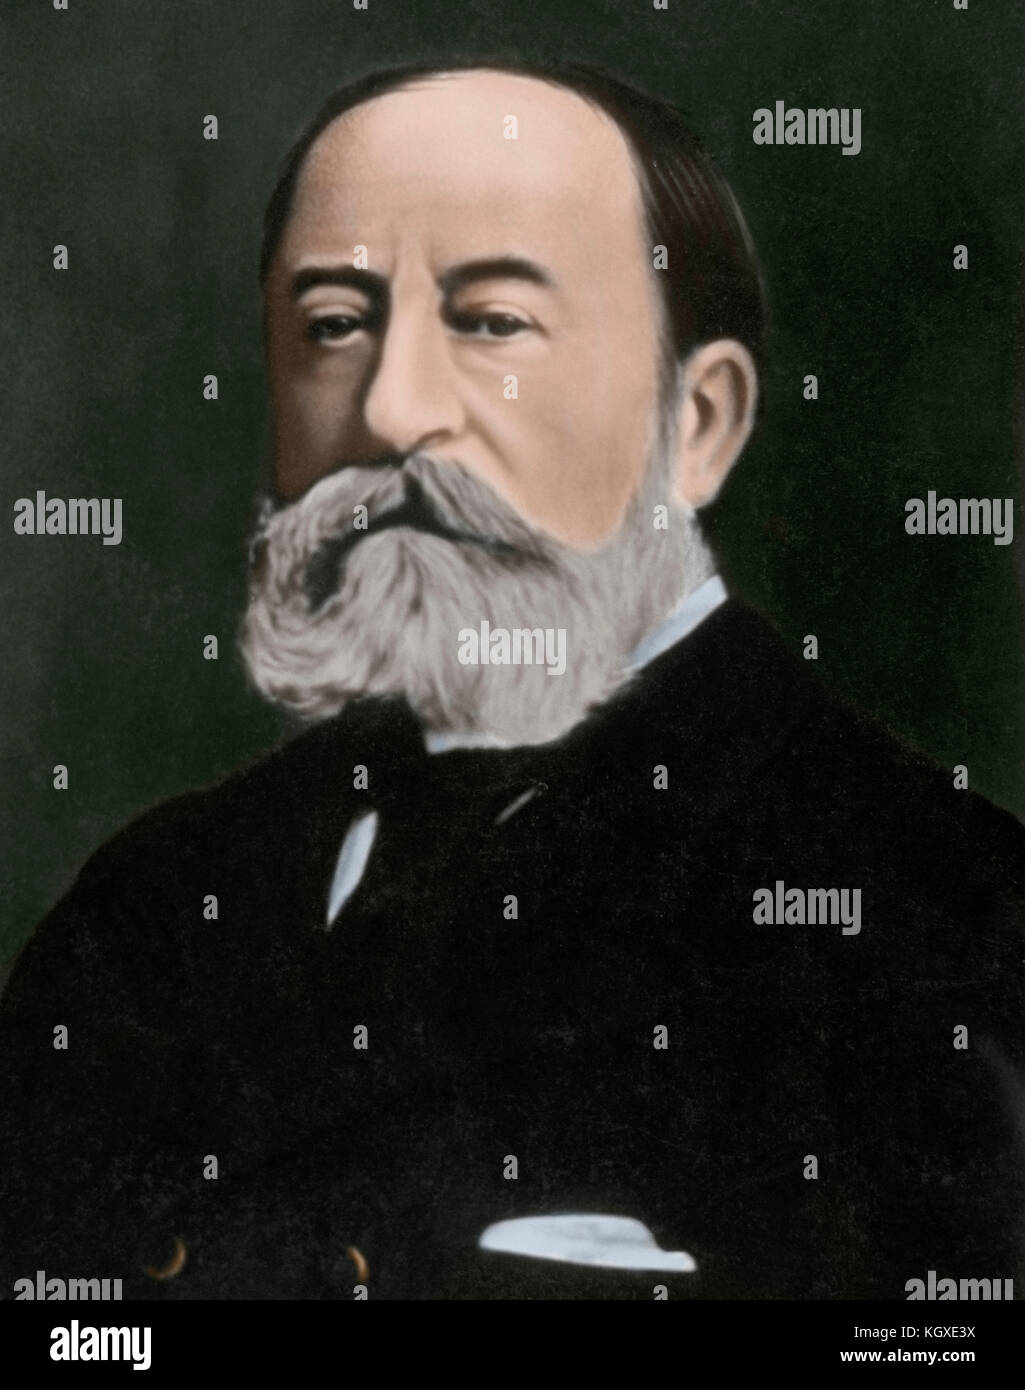 Camille Saint-Saens (1835-1921). French composer, organist, conductor and pianist. Romantic era. Portrait. Photography. Colored. Stock Photo